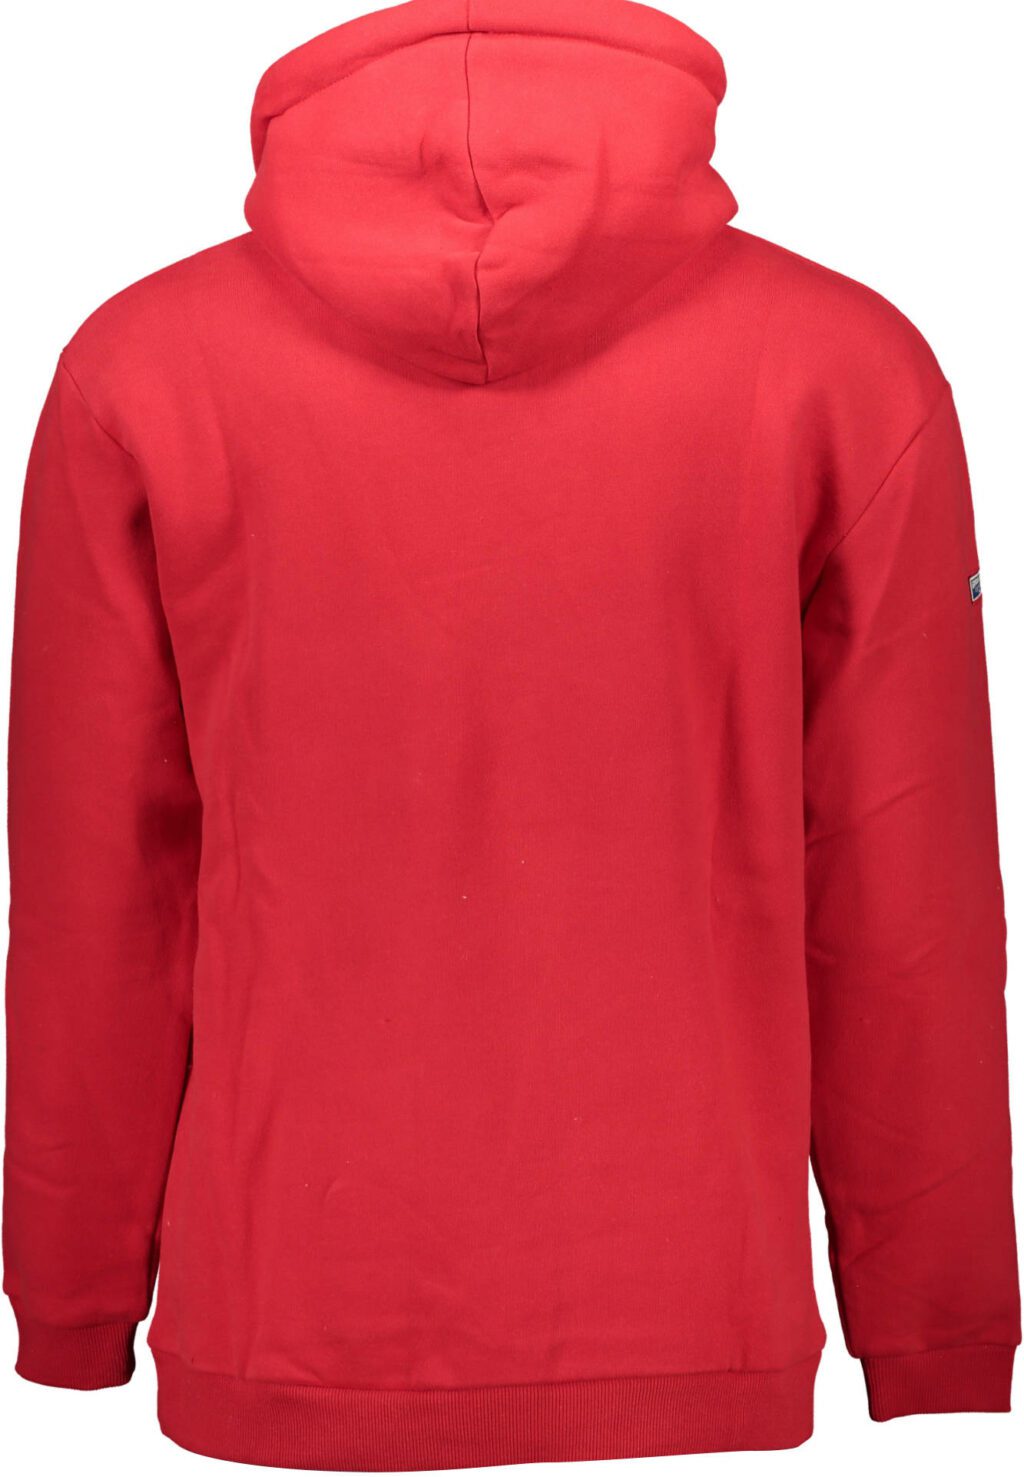 SUPERDRY SWEATSHIRT WITHOUT ZIP MAN RED M2011417A_ROSSO_5OL